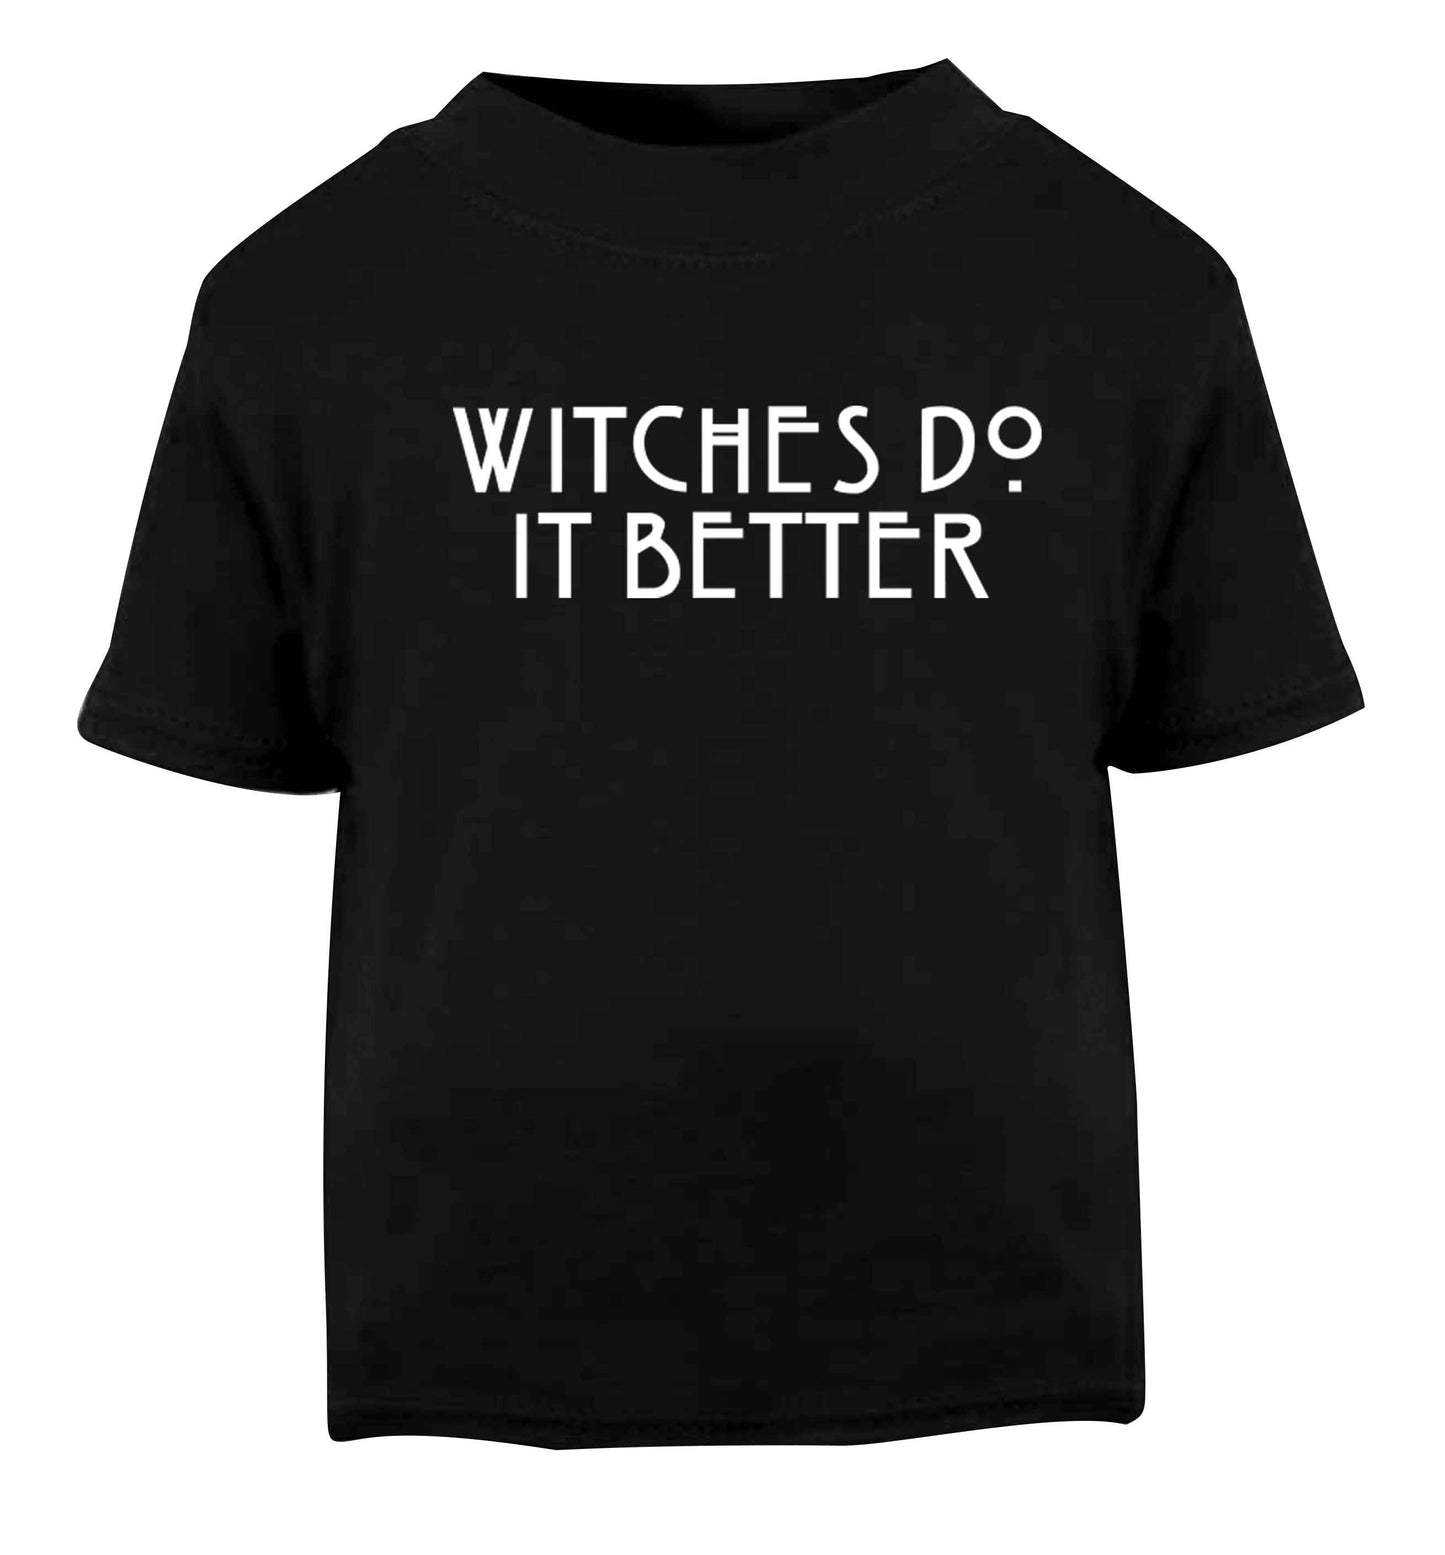 Witches do it better Black baby toddler Tshirt 2 years